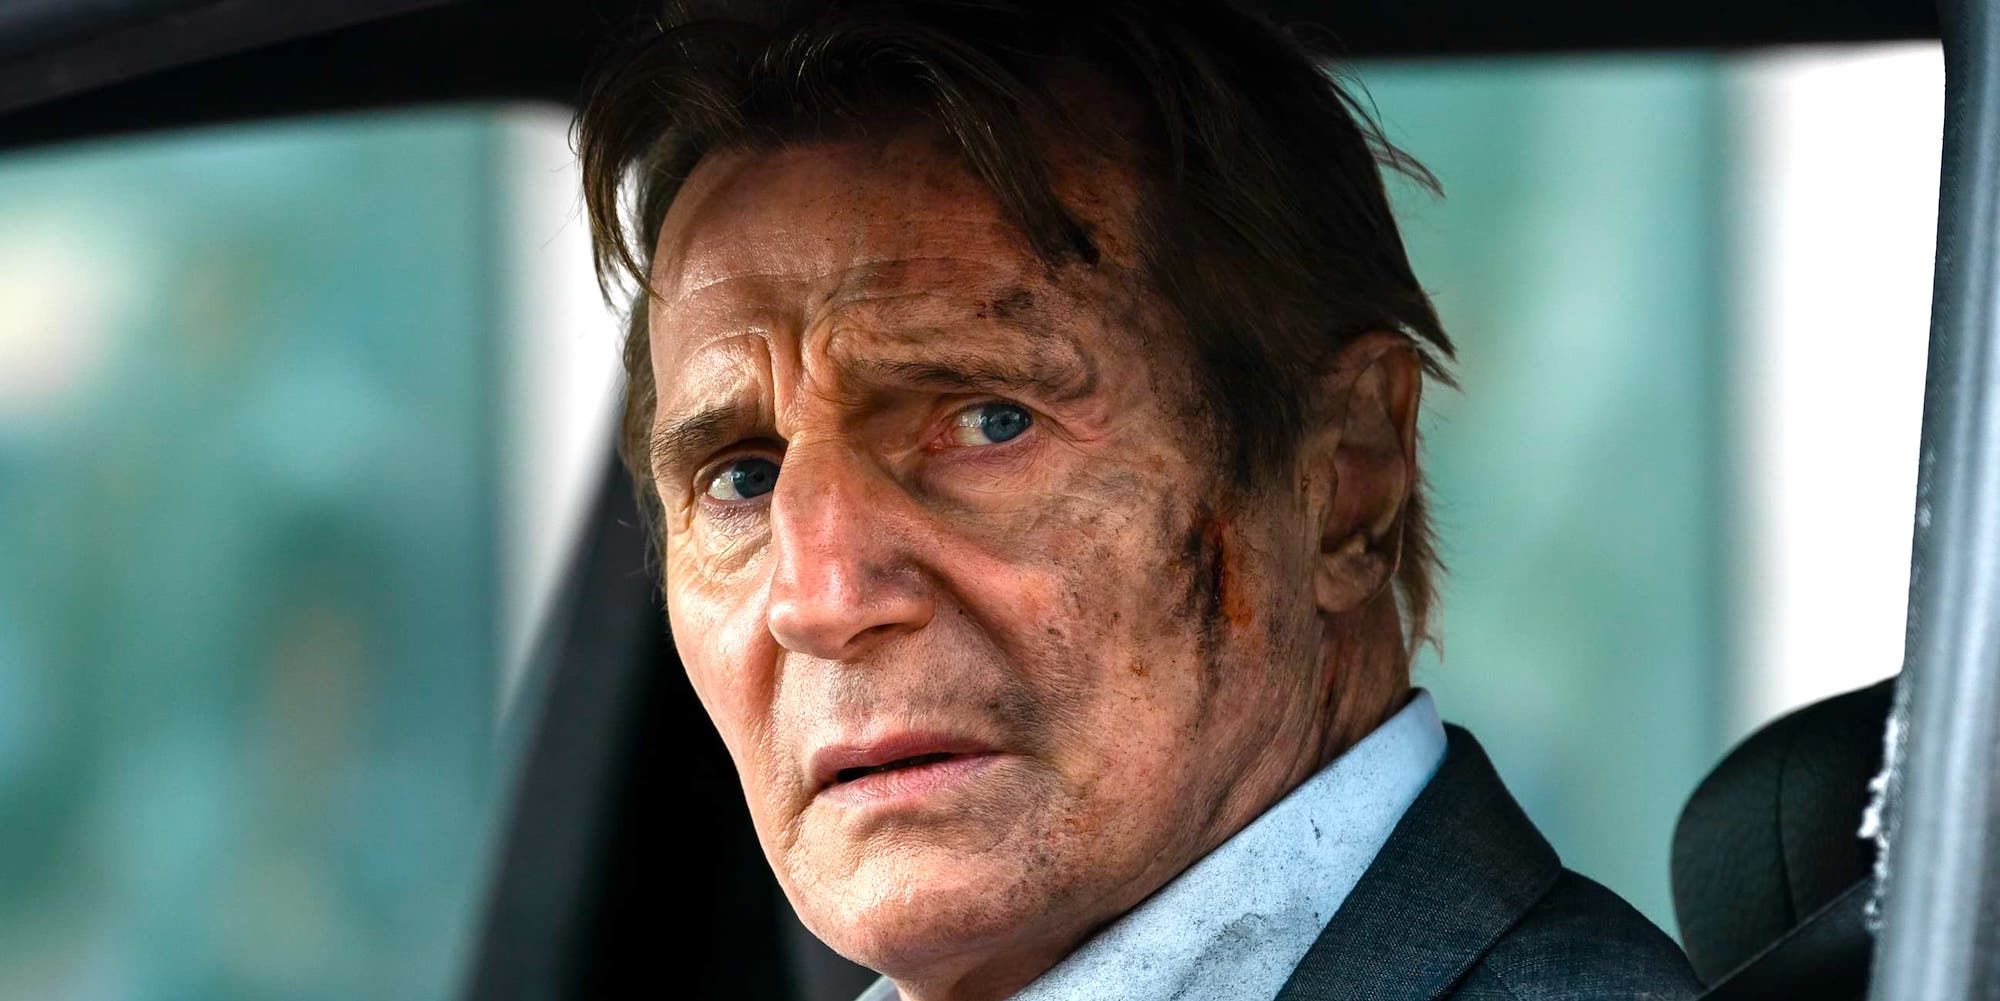 Liam Neeson Looking Scratched Up in Retribution